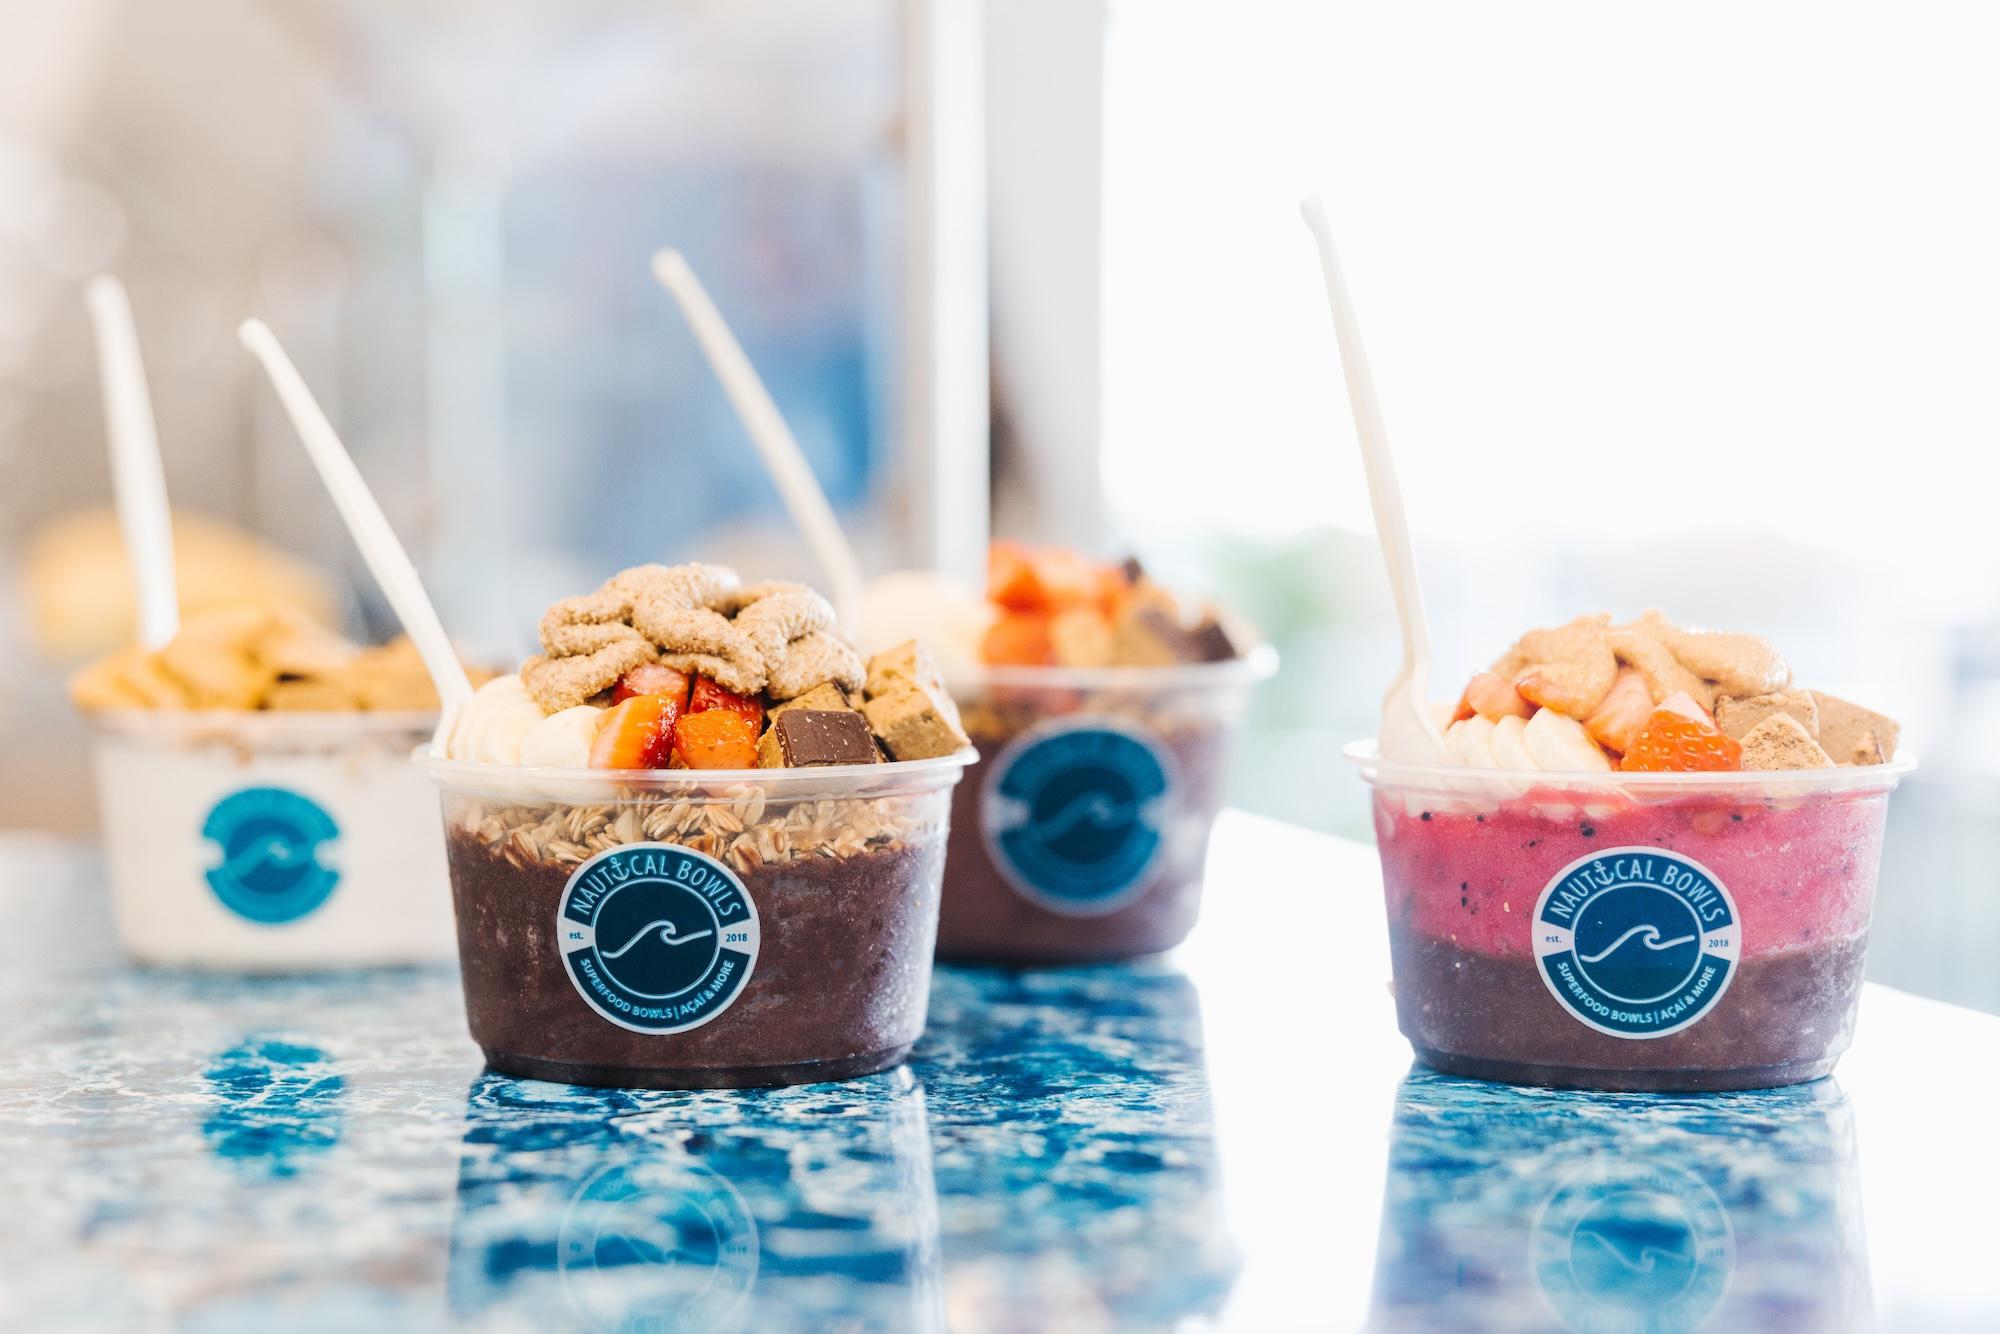 A Nautical Bowls classic! The Nauti Bowl combines Açaí, Pitaya, Freshly Ground Peanut Butter, Crunchy Granola and Cacao Nibs for a full meal filled with flavor. One of the top-selling Signature Bowls, the Nauti Bowl has been a fan-favorite for a healthy breakfast, lunch & post-workout recharge.